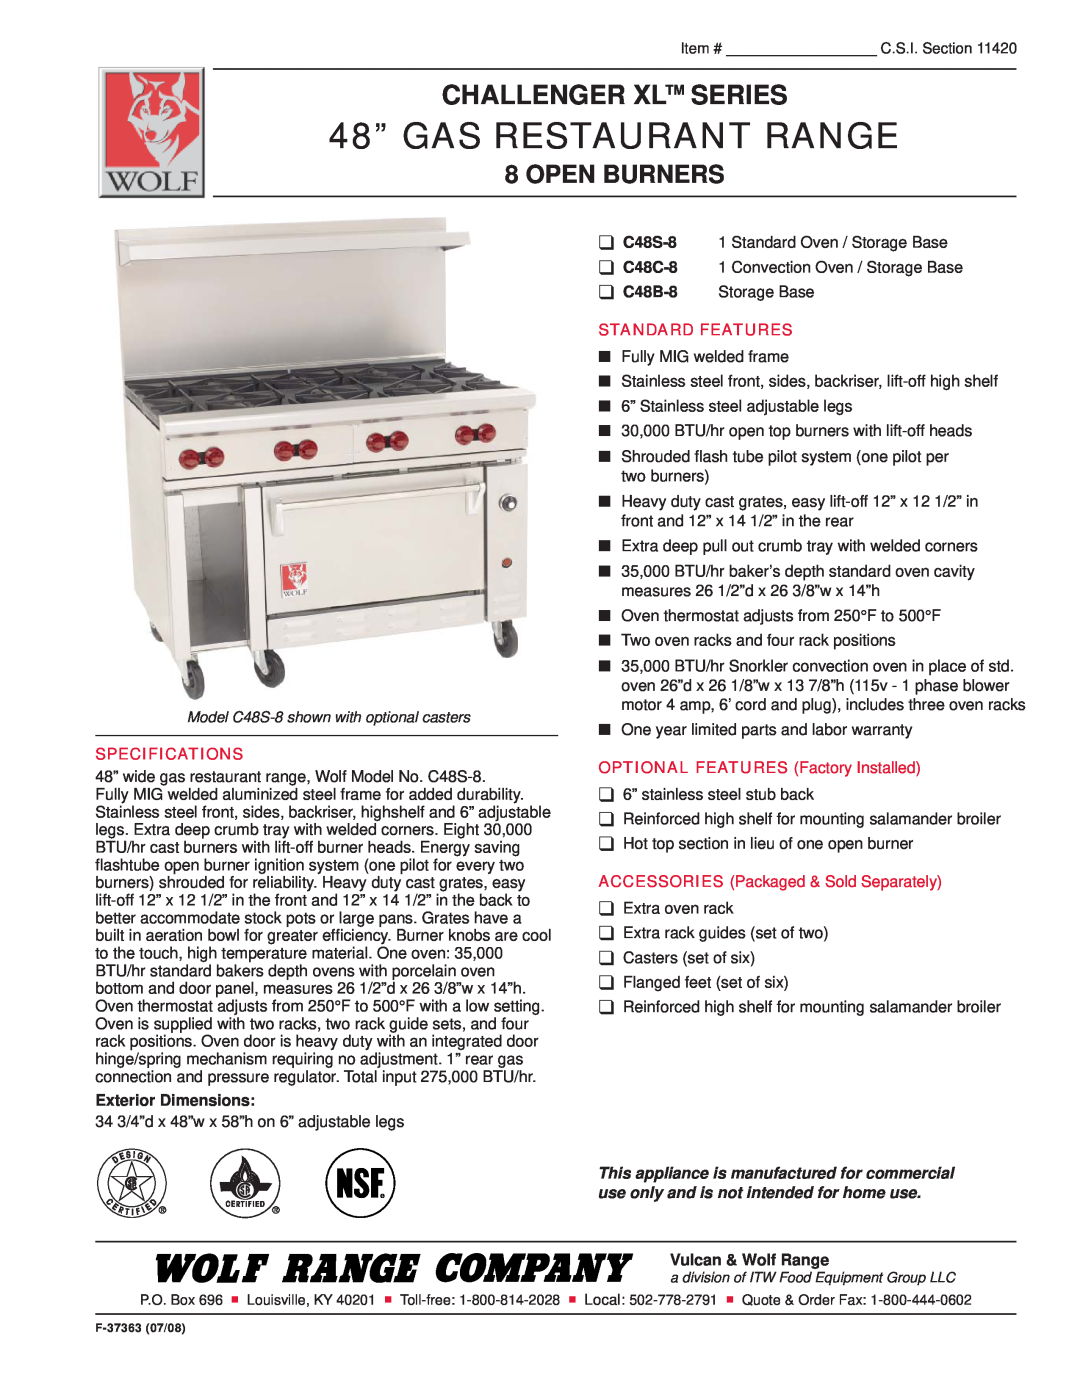 Wolf F-37363 specifications 48” GAS RESTAURANT RANGE, Challenger Xl Series, Open Burners, Specifications 